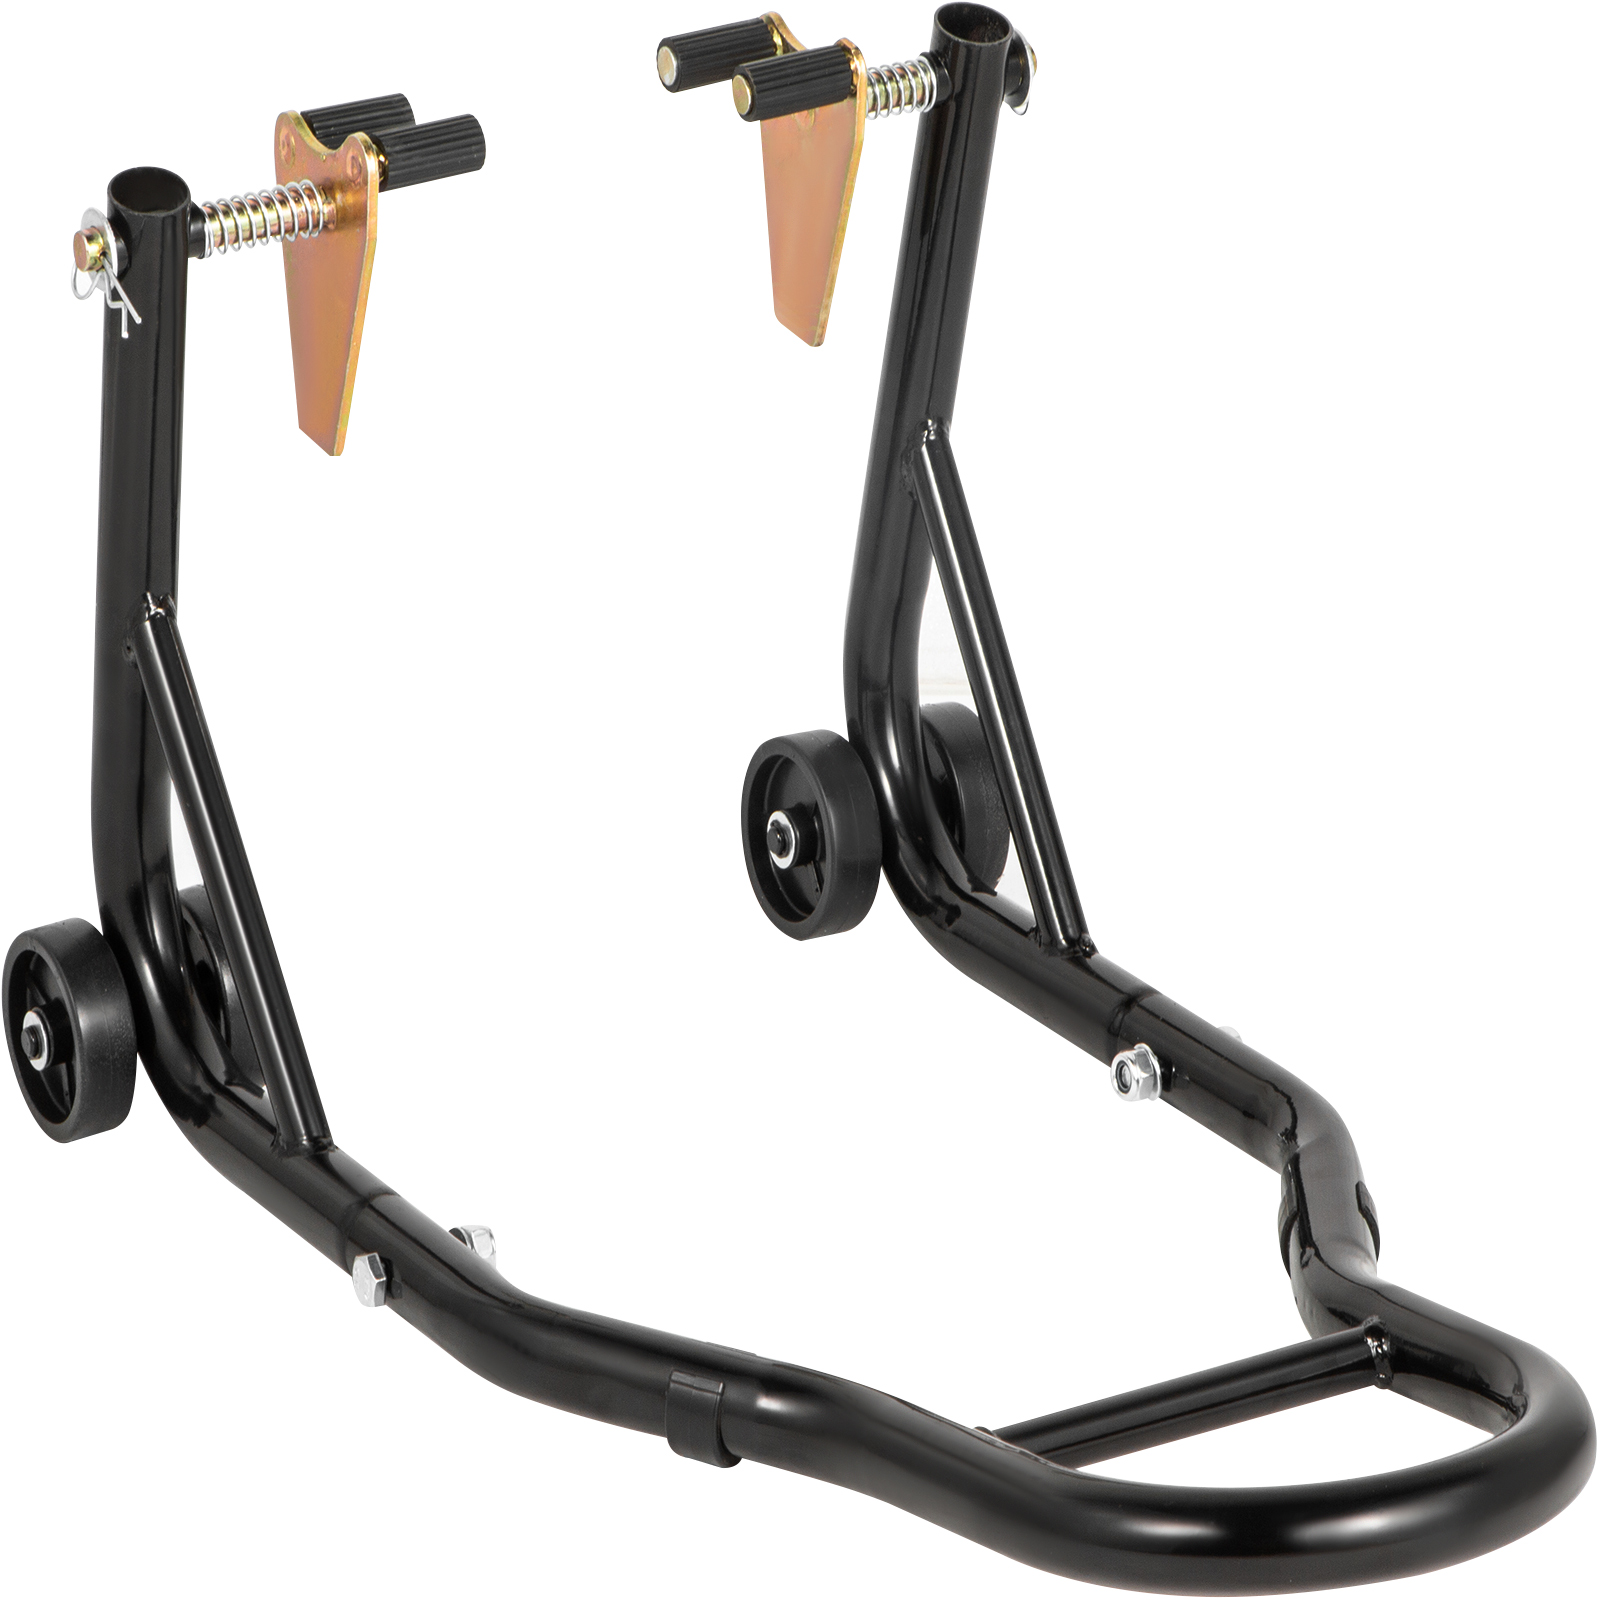 VEVOR Motorcycle Stand Paddock Stand Front Fork Lift Sport, 3 in Cast Iron Wheel от Vevor Many GEOs